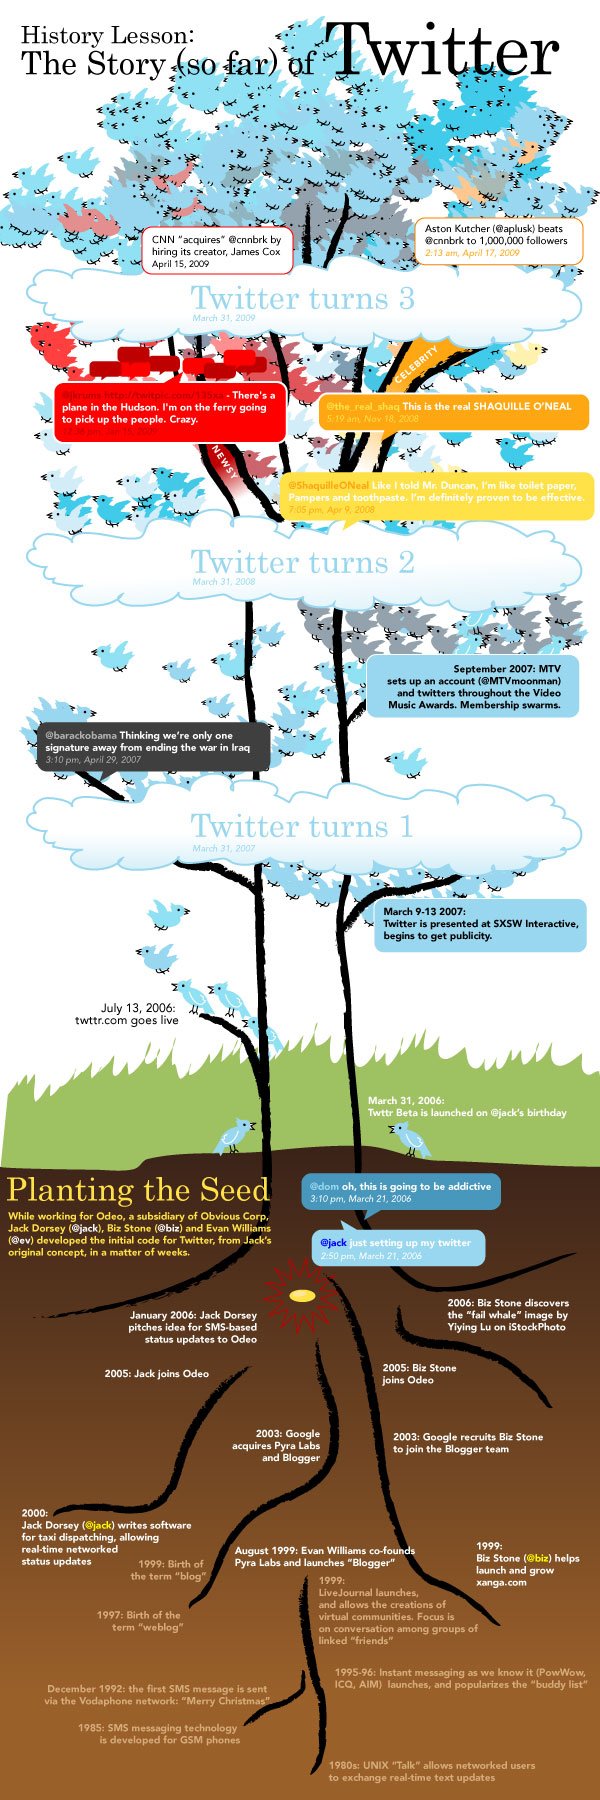 history-of-twitter-concept